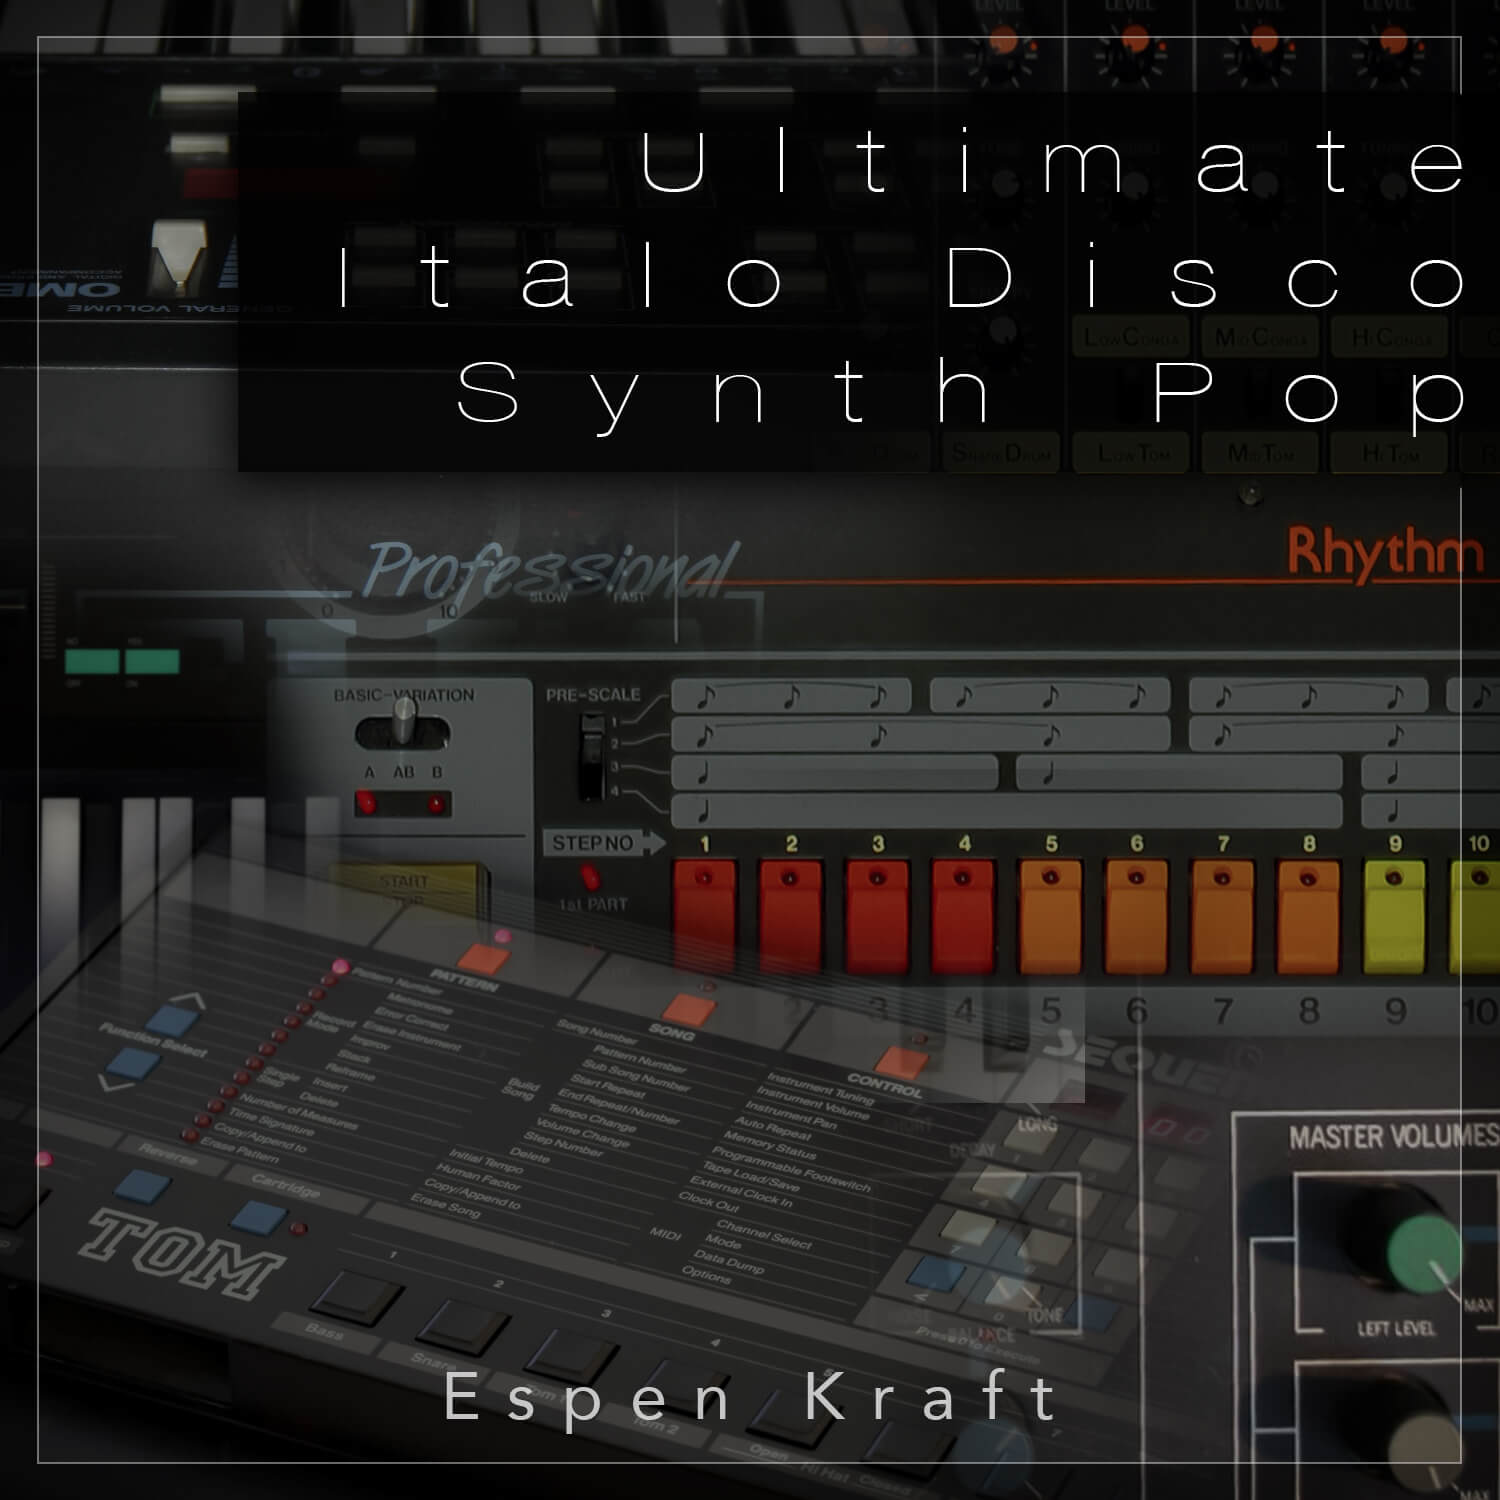 Over 600 mb of italo disco and synth-pop samples including drum hits, loops, Vox, all sampled from authentic 80s synthesizer hardware